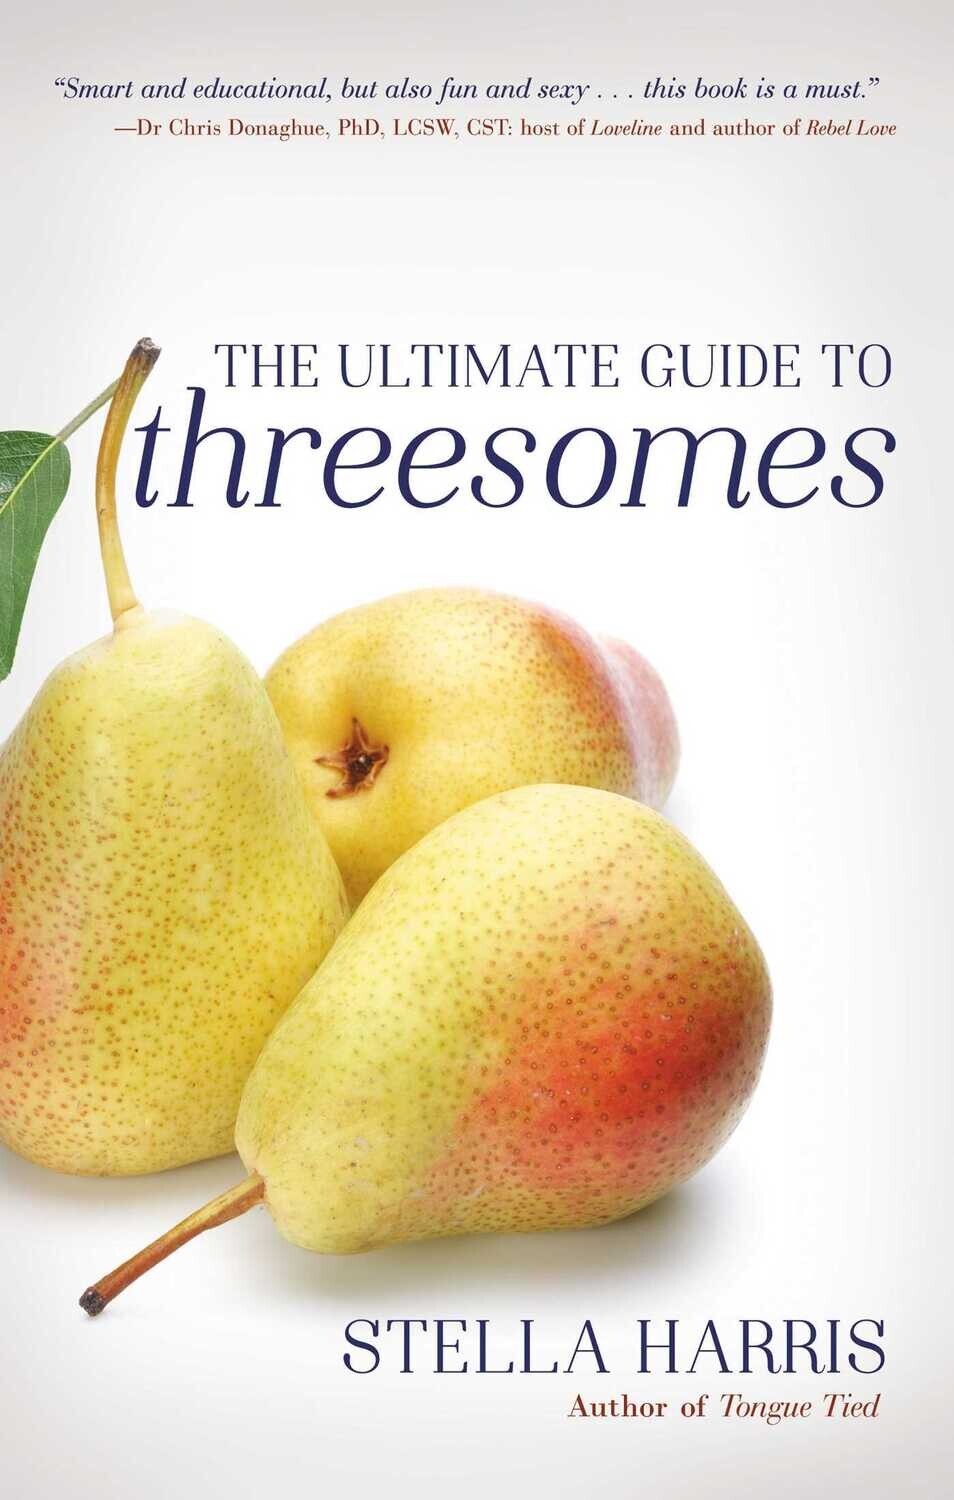 The Ultimate Guide to Threesomes